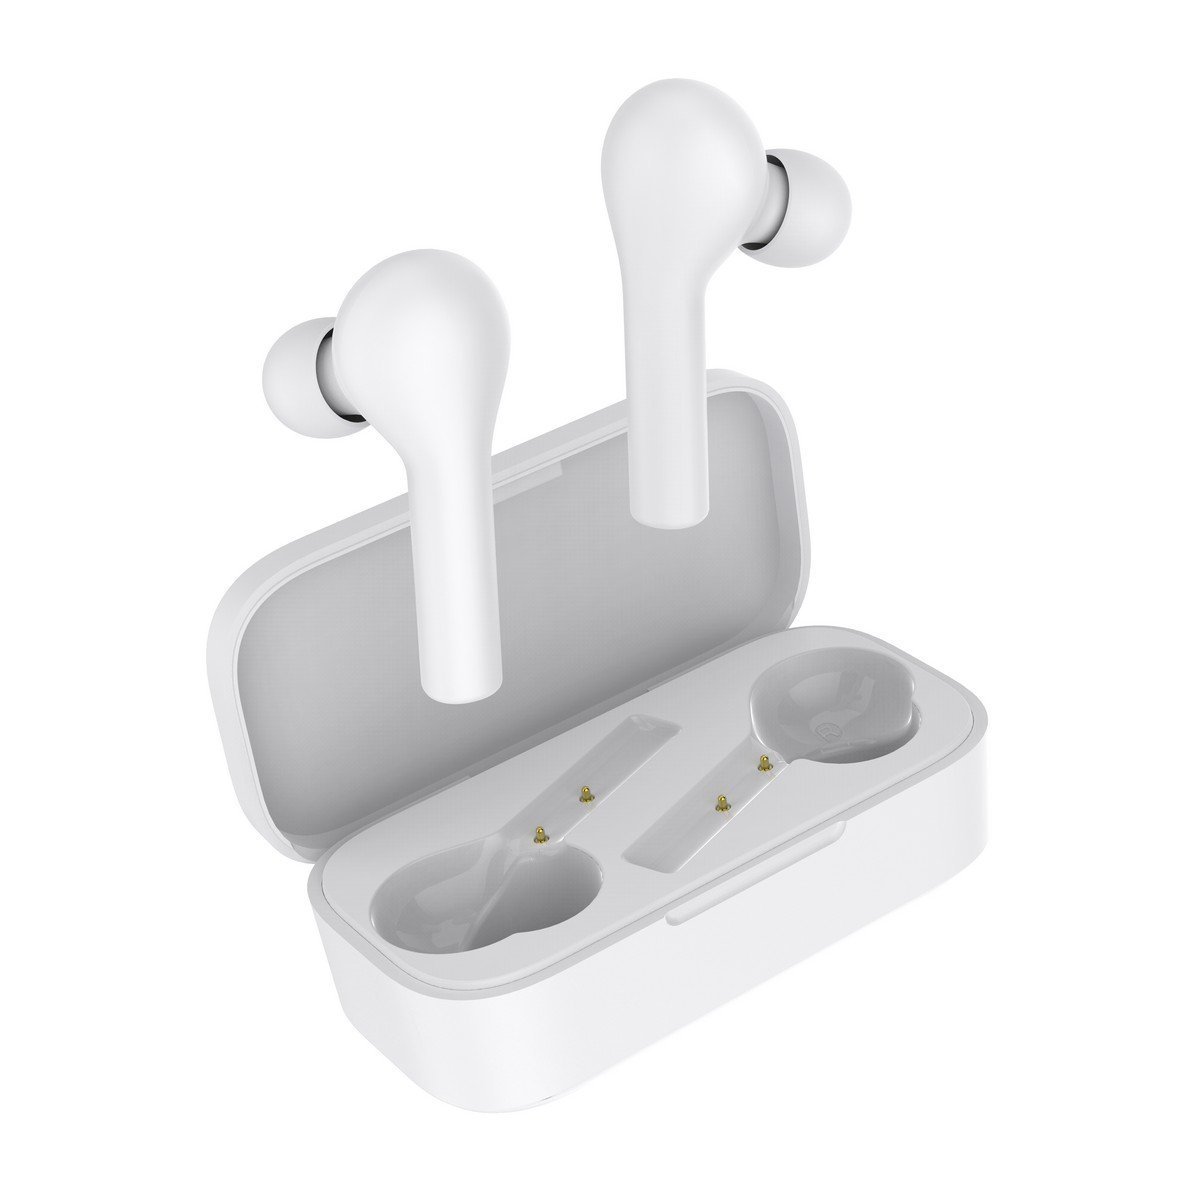 Casti in-Ear QCY T5 TWS, Alb, Wireless, Bluetooth 5.0, Control touch, Baterie 380 mAh QCY imagine noua tecomm.ro